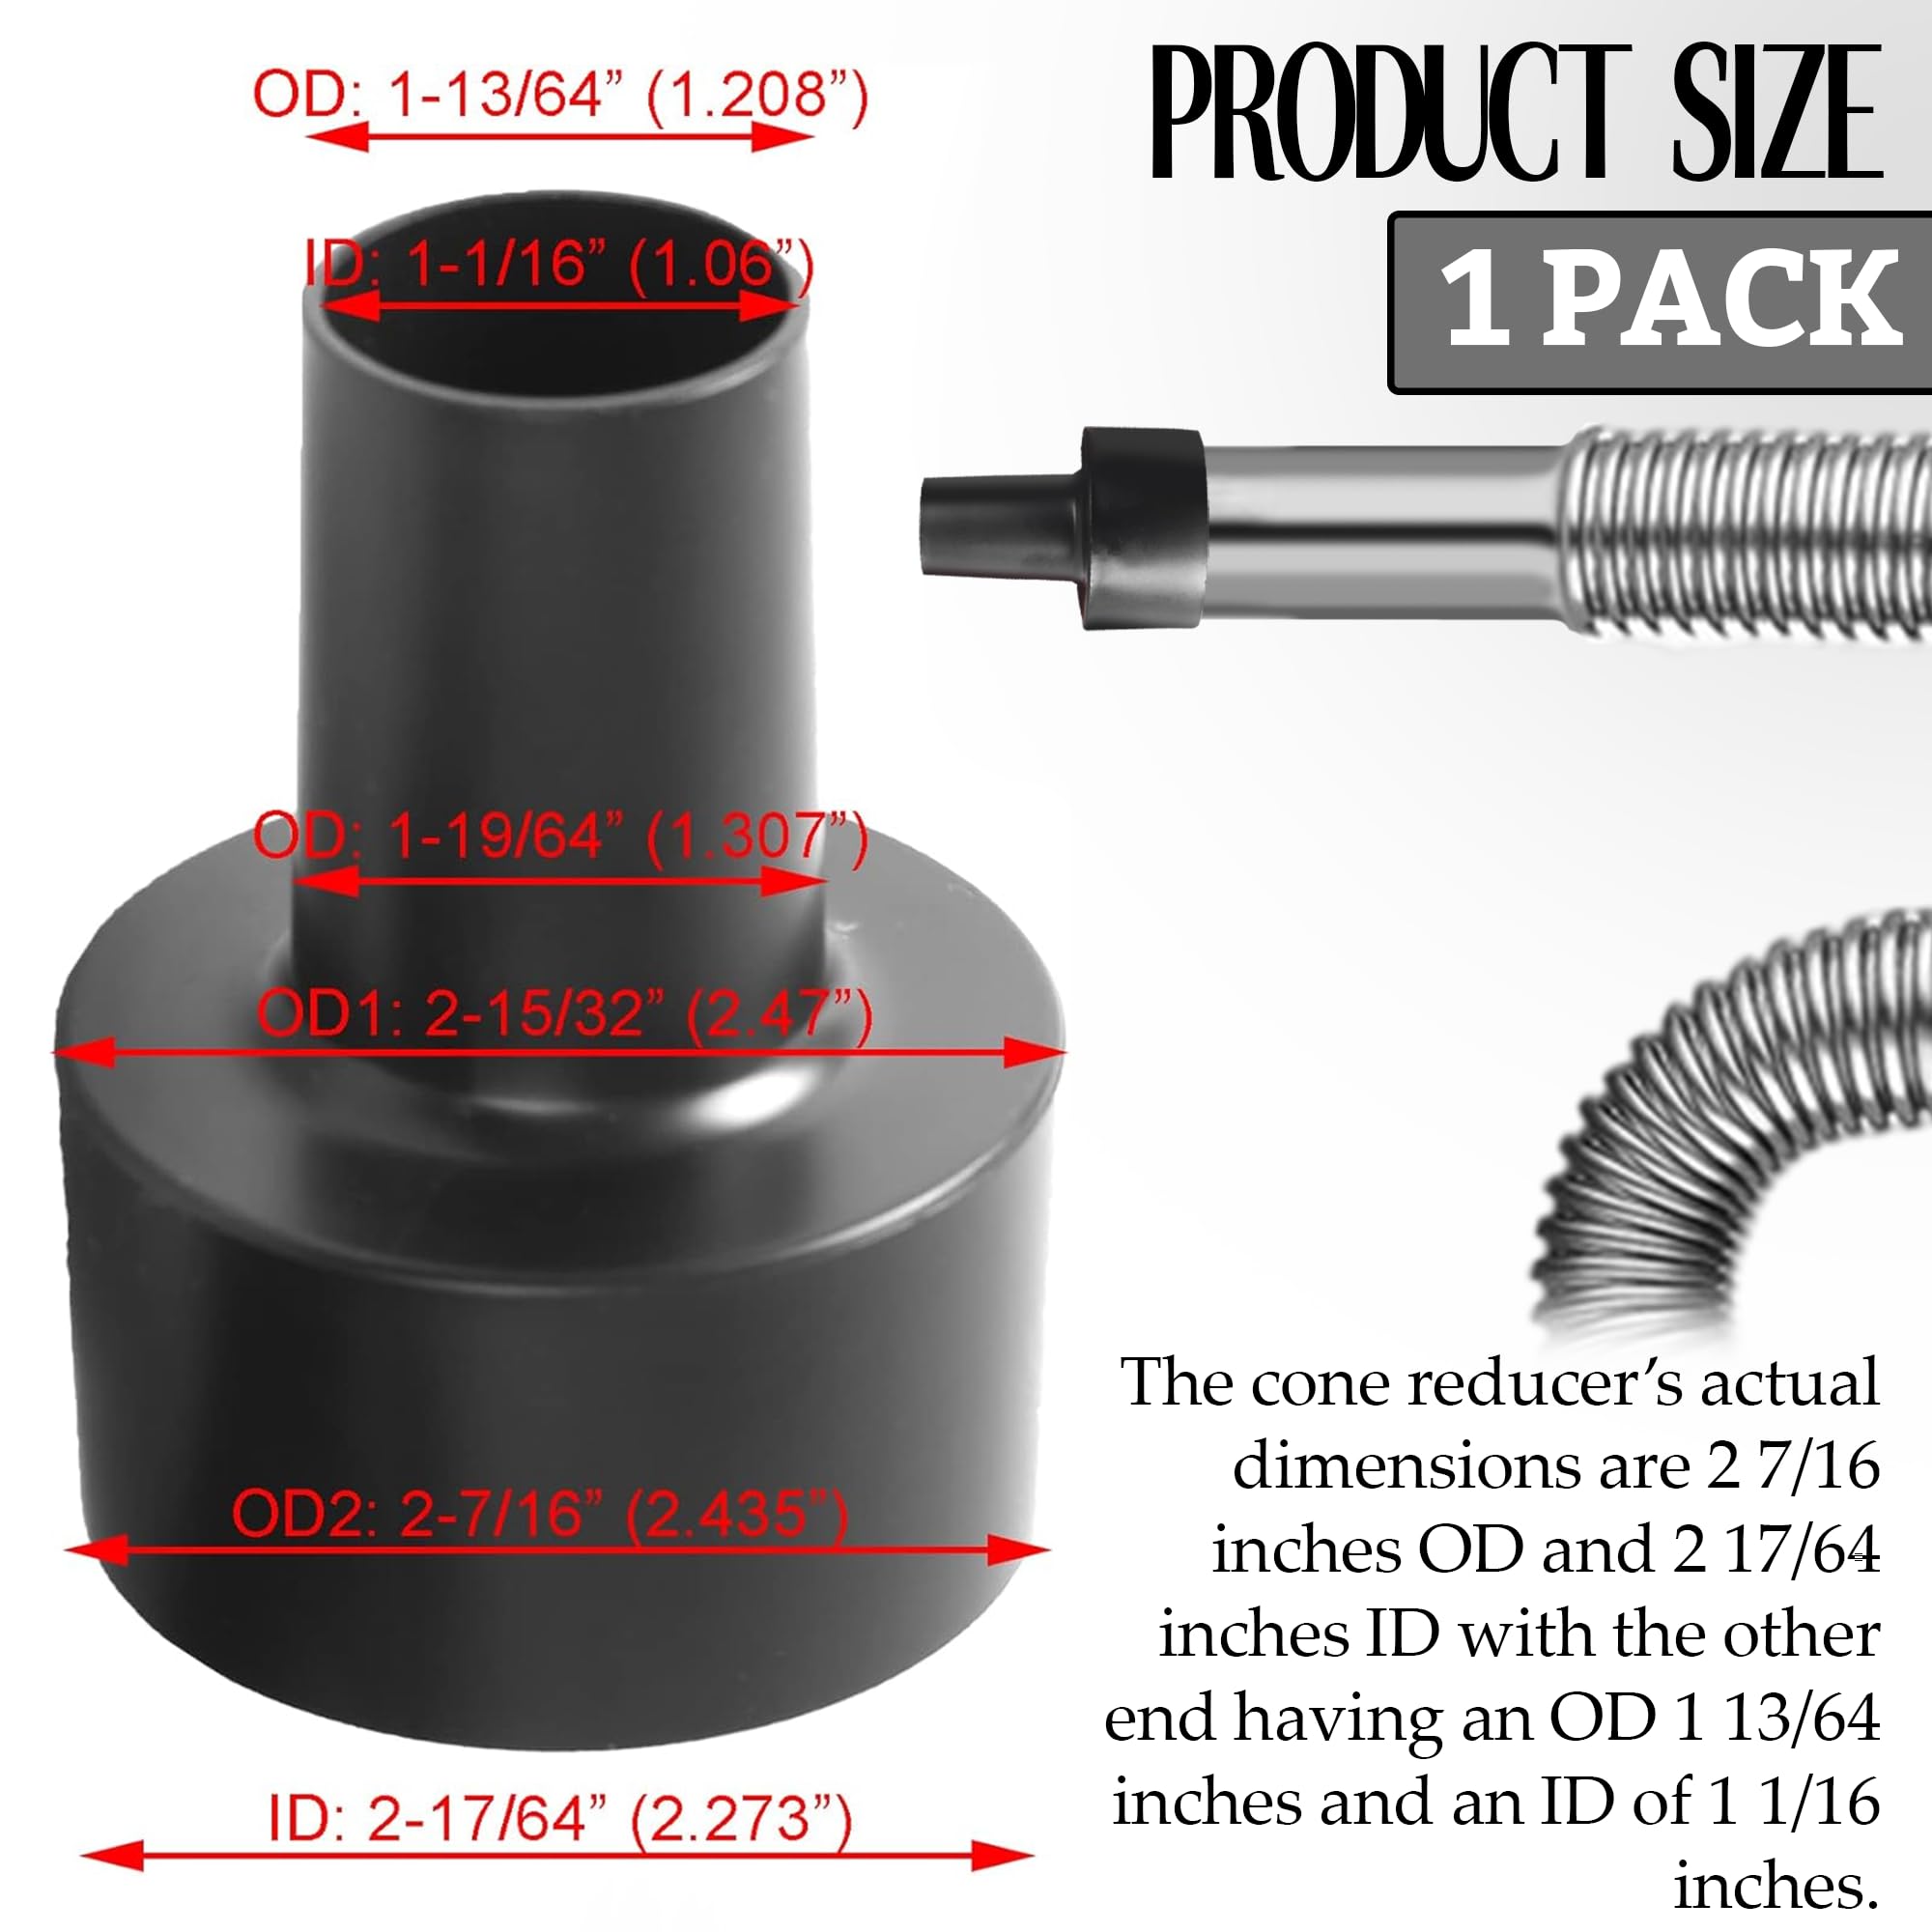 TonGass 2 1/2-Inch to 1 1/4-Inch Cone Reducer - Universal Fit Vacuum Hose Adapter/Dust Collection Fittings/Attachment Reducer - Made of Heavy-Duty ABS Plastic